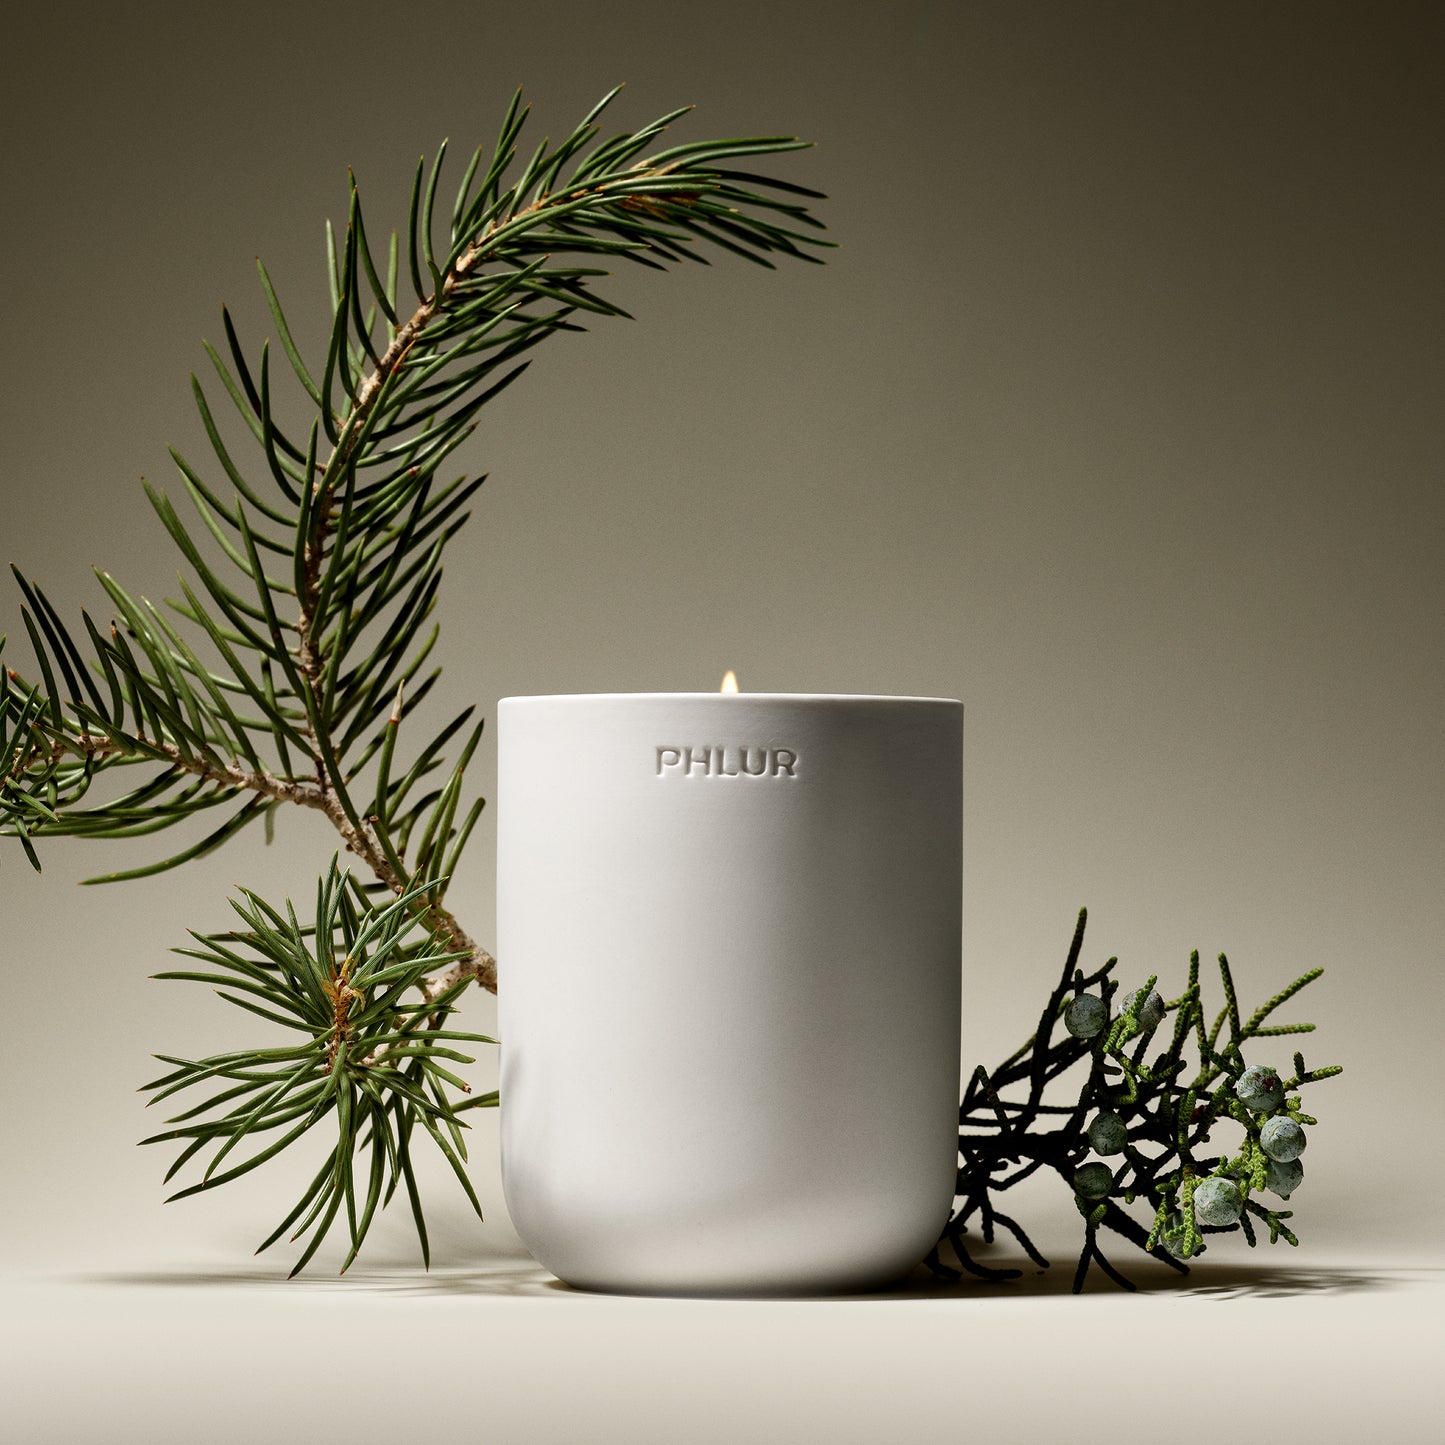 Phlur's Wild Balsam holiday candle